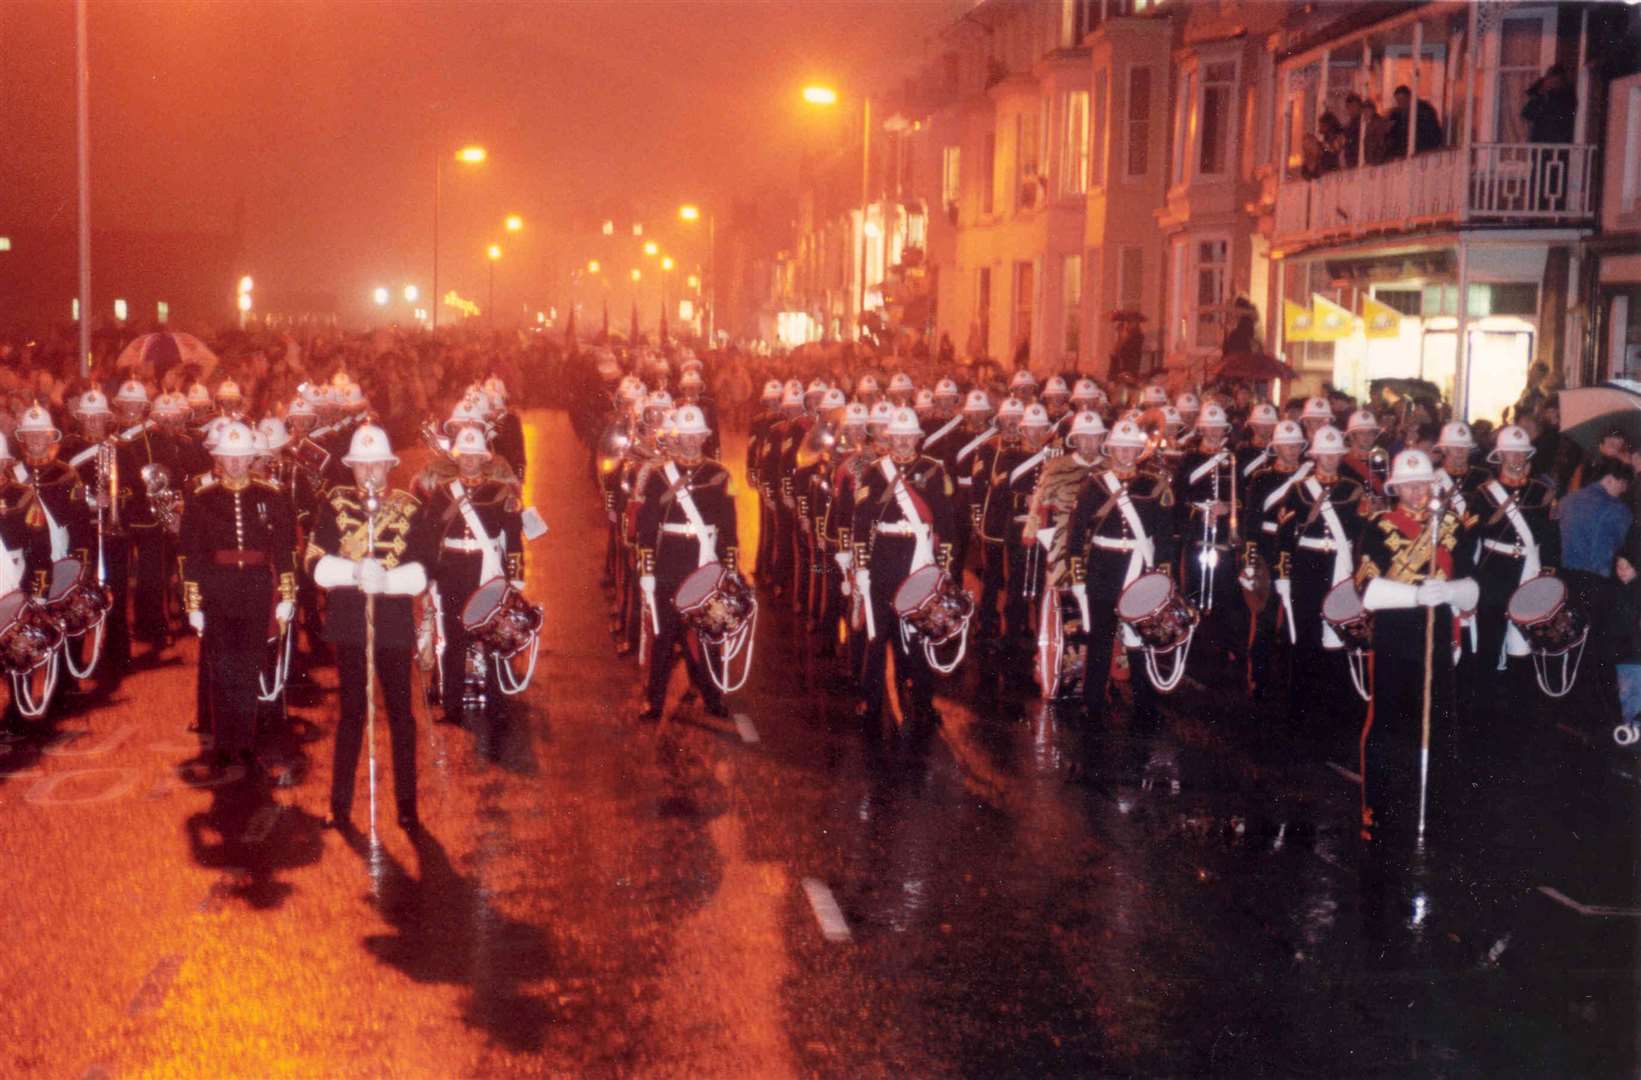 The Royal Marines staff band marched through Deal for the last time in 1996